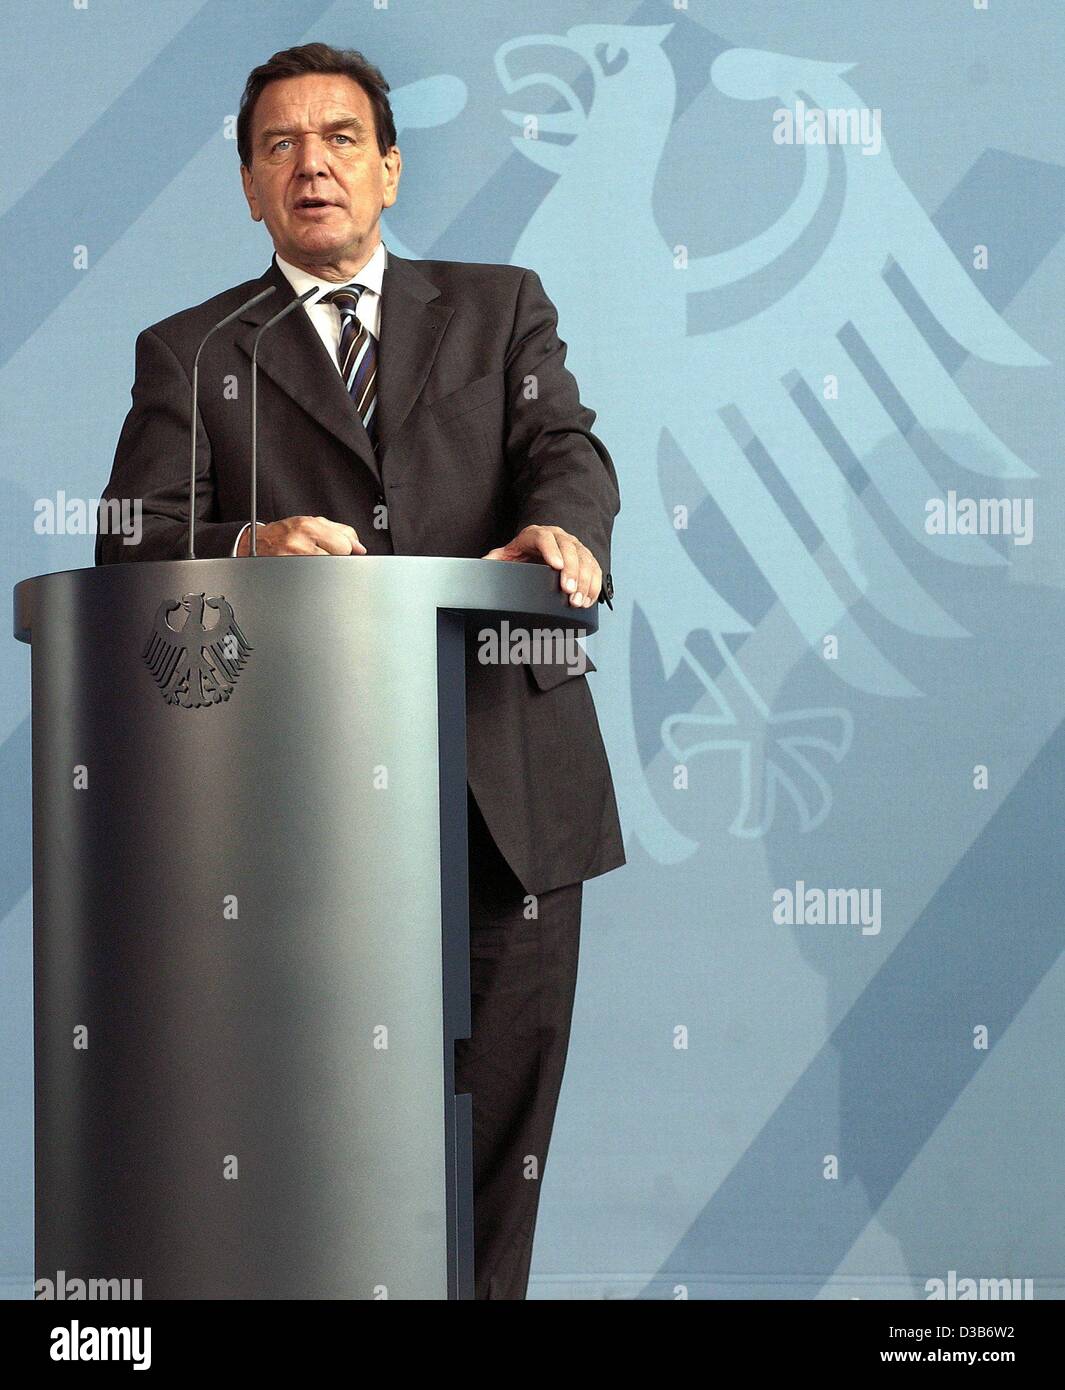 (dpa) - Chancellor Gerhard Schroeder comments on the plans to reduce unemployment in Germany in front of the Federal Eagle logo in the chancellor's office in Berlin, 9 August 2002. Stock Photo